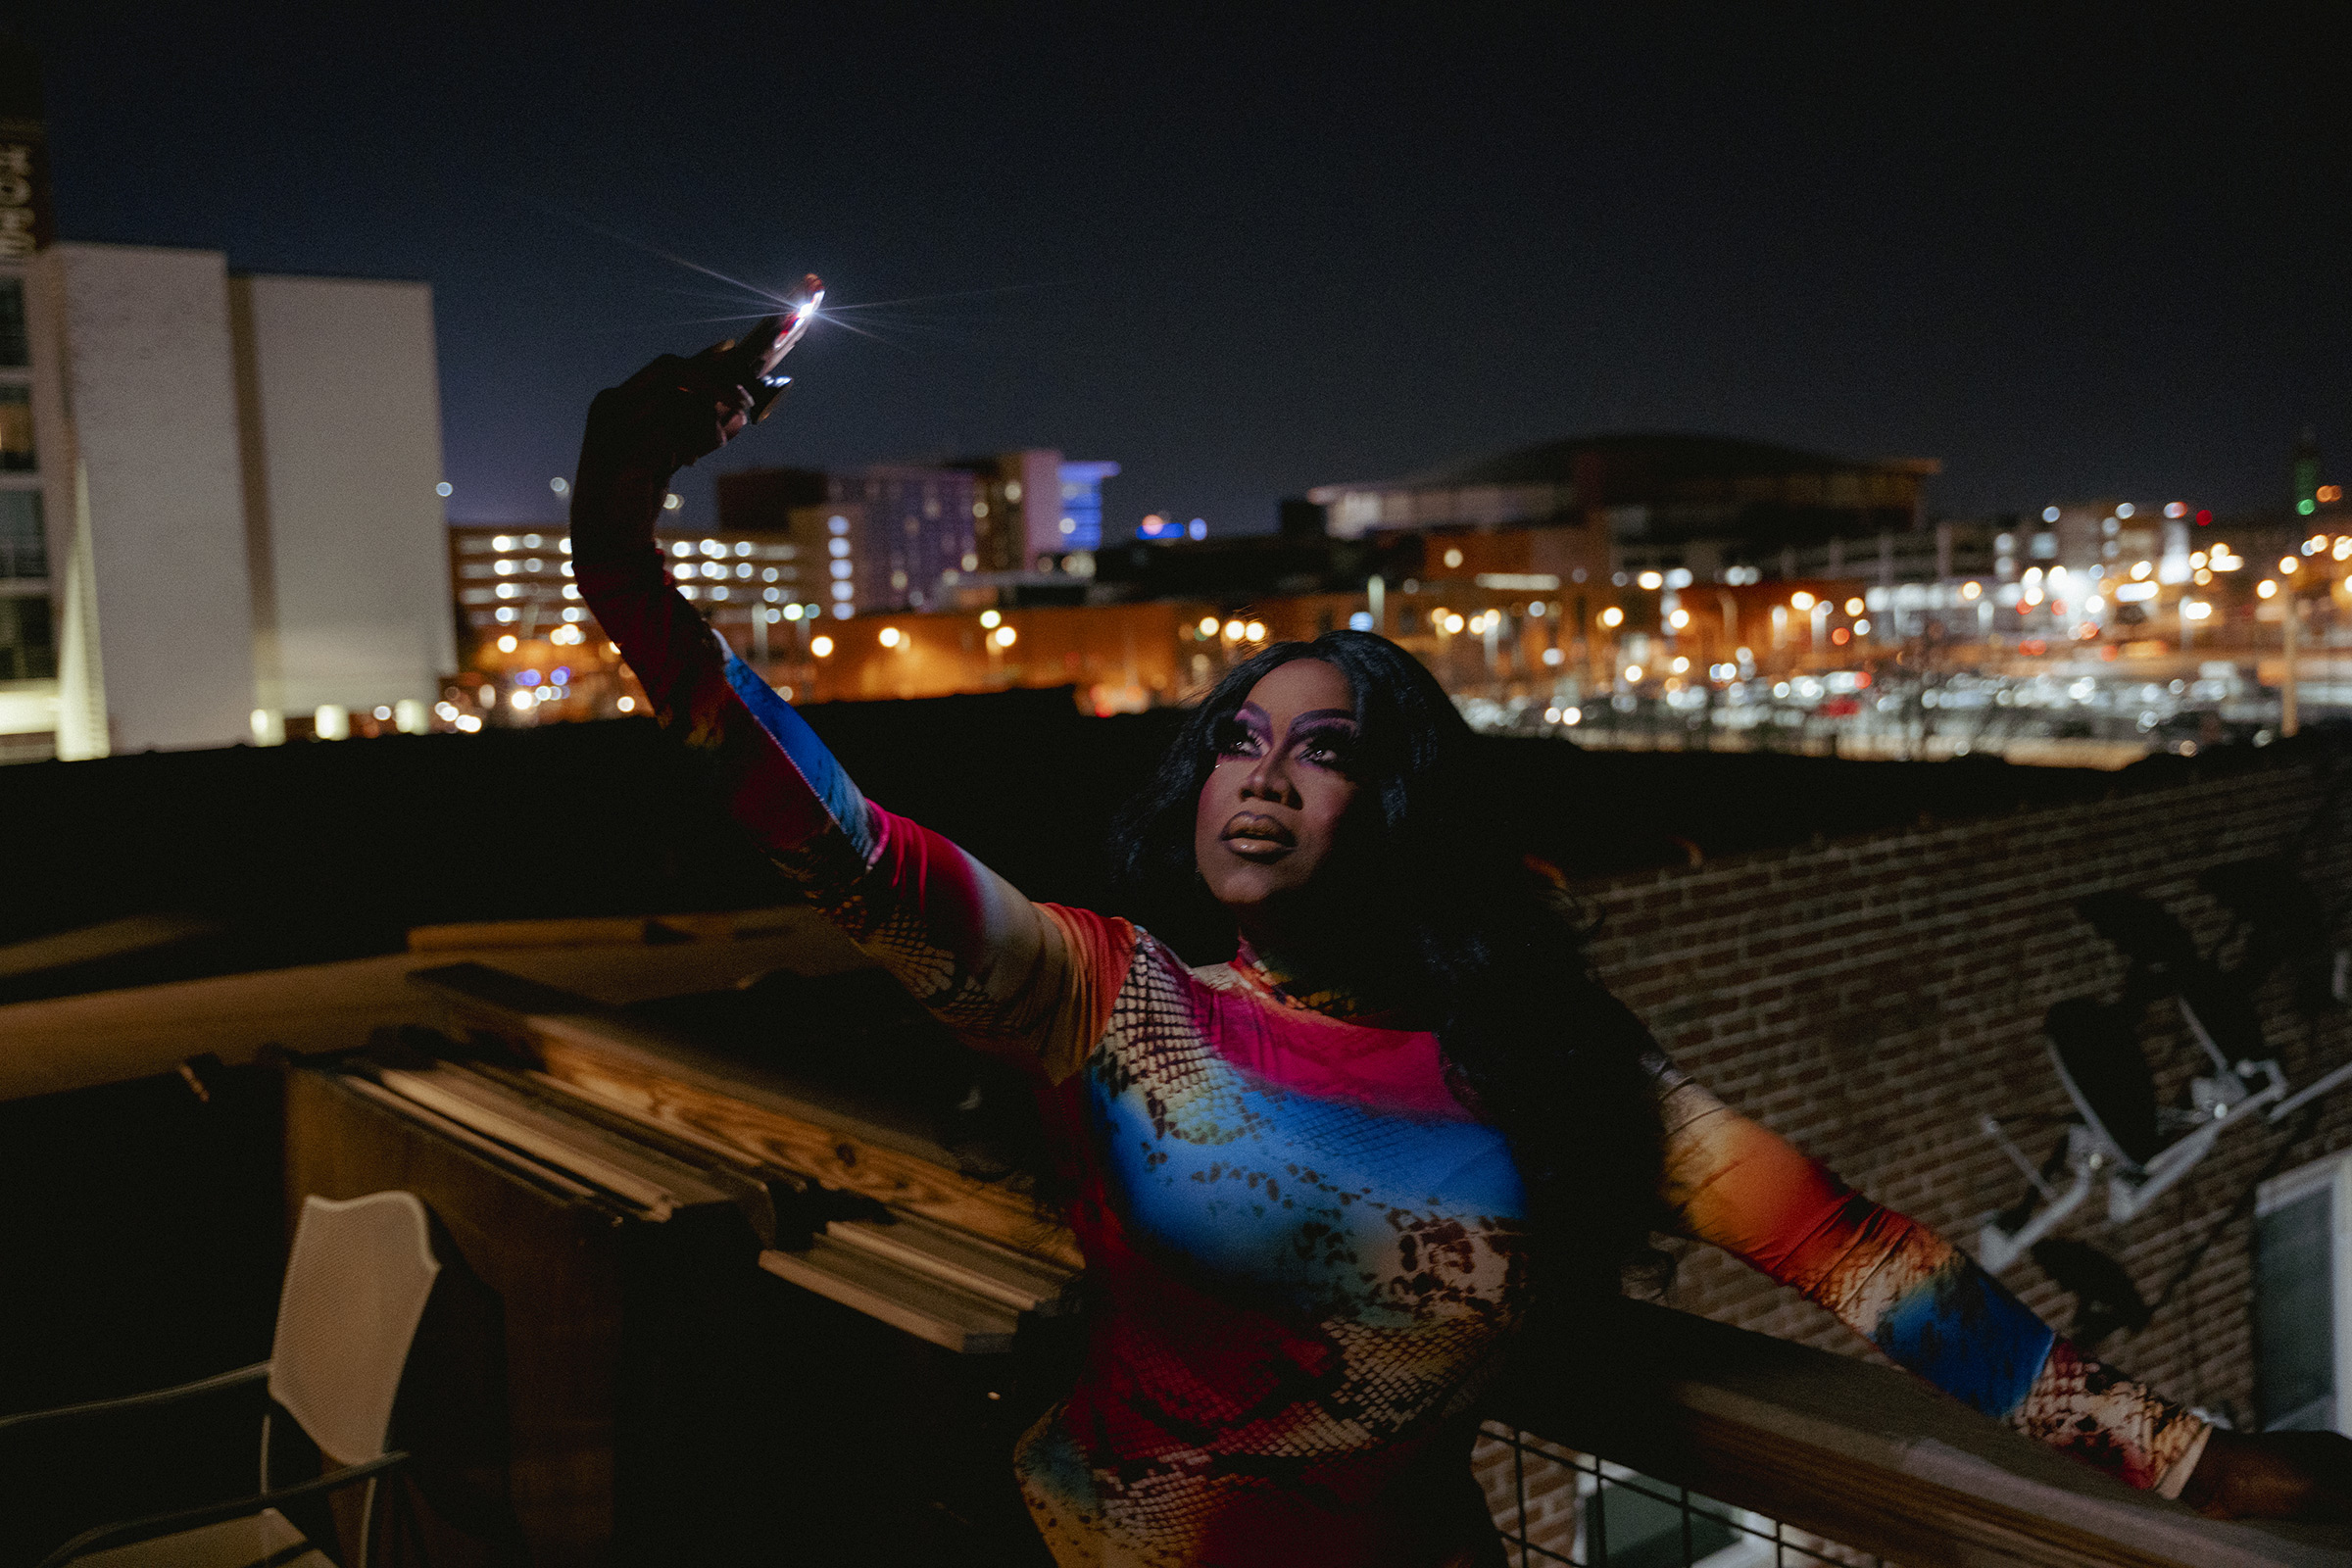 Infiniti Bonet takes a selfie of her first performance look for the drag show at IBIS. (Andrea Morales for TIME)